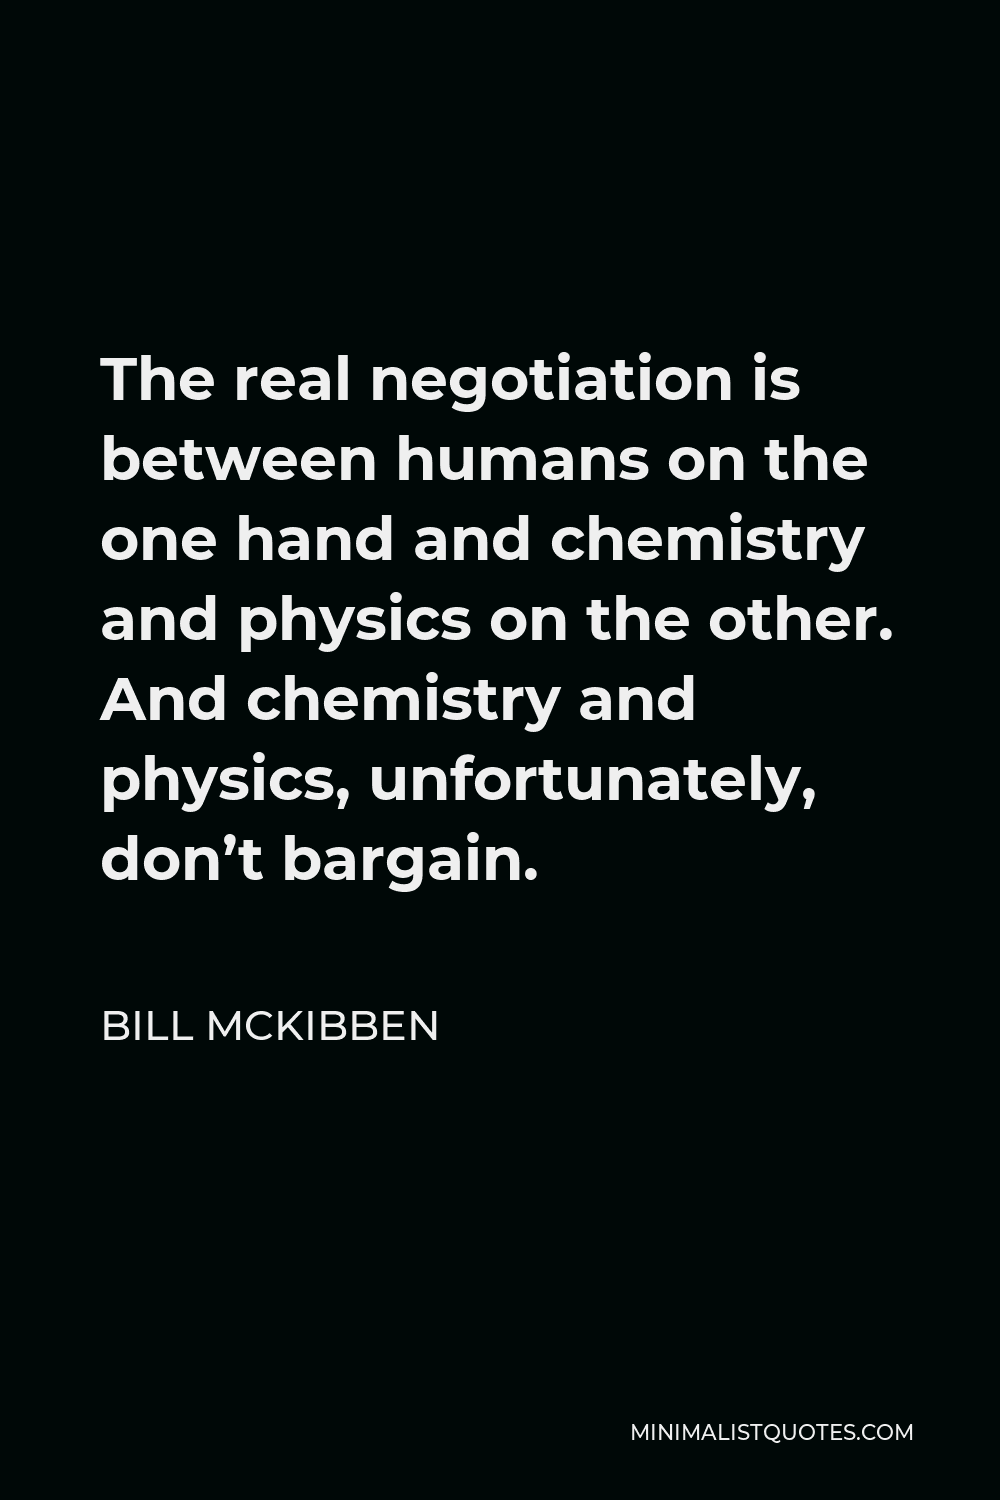 Bill McKibben Quote - The real negotiation is between humans on the one hand and chemistry and physics on the other. And chemistry and physics, unfortunately, don’t bargain.